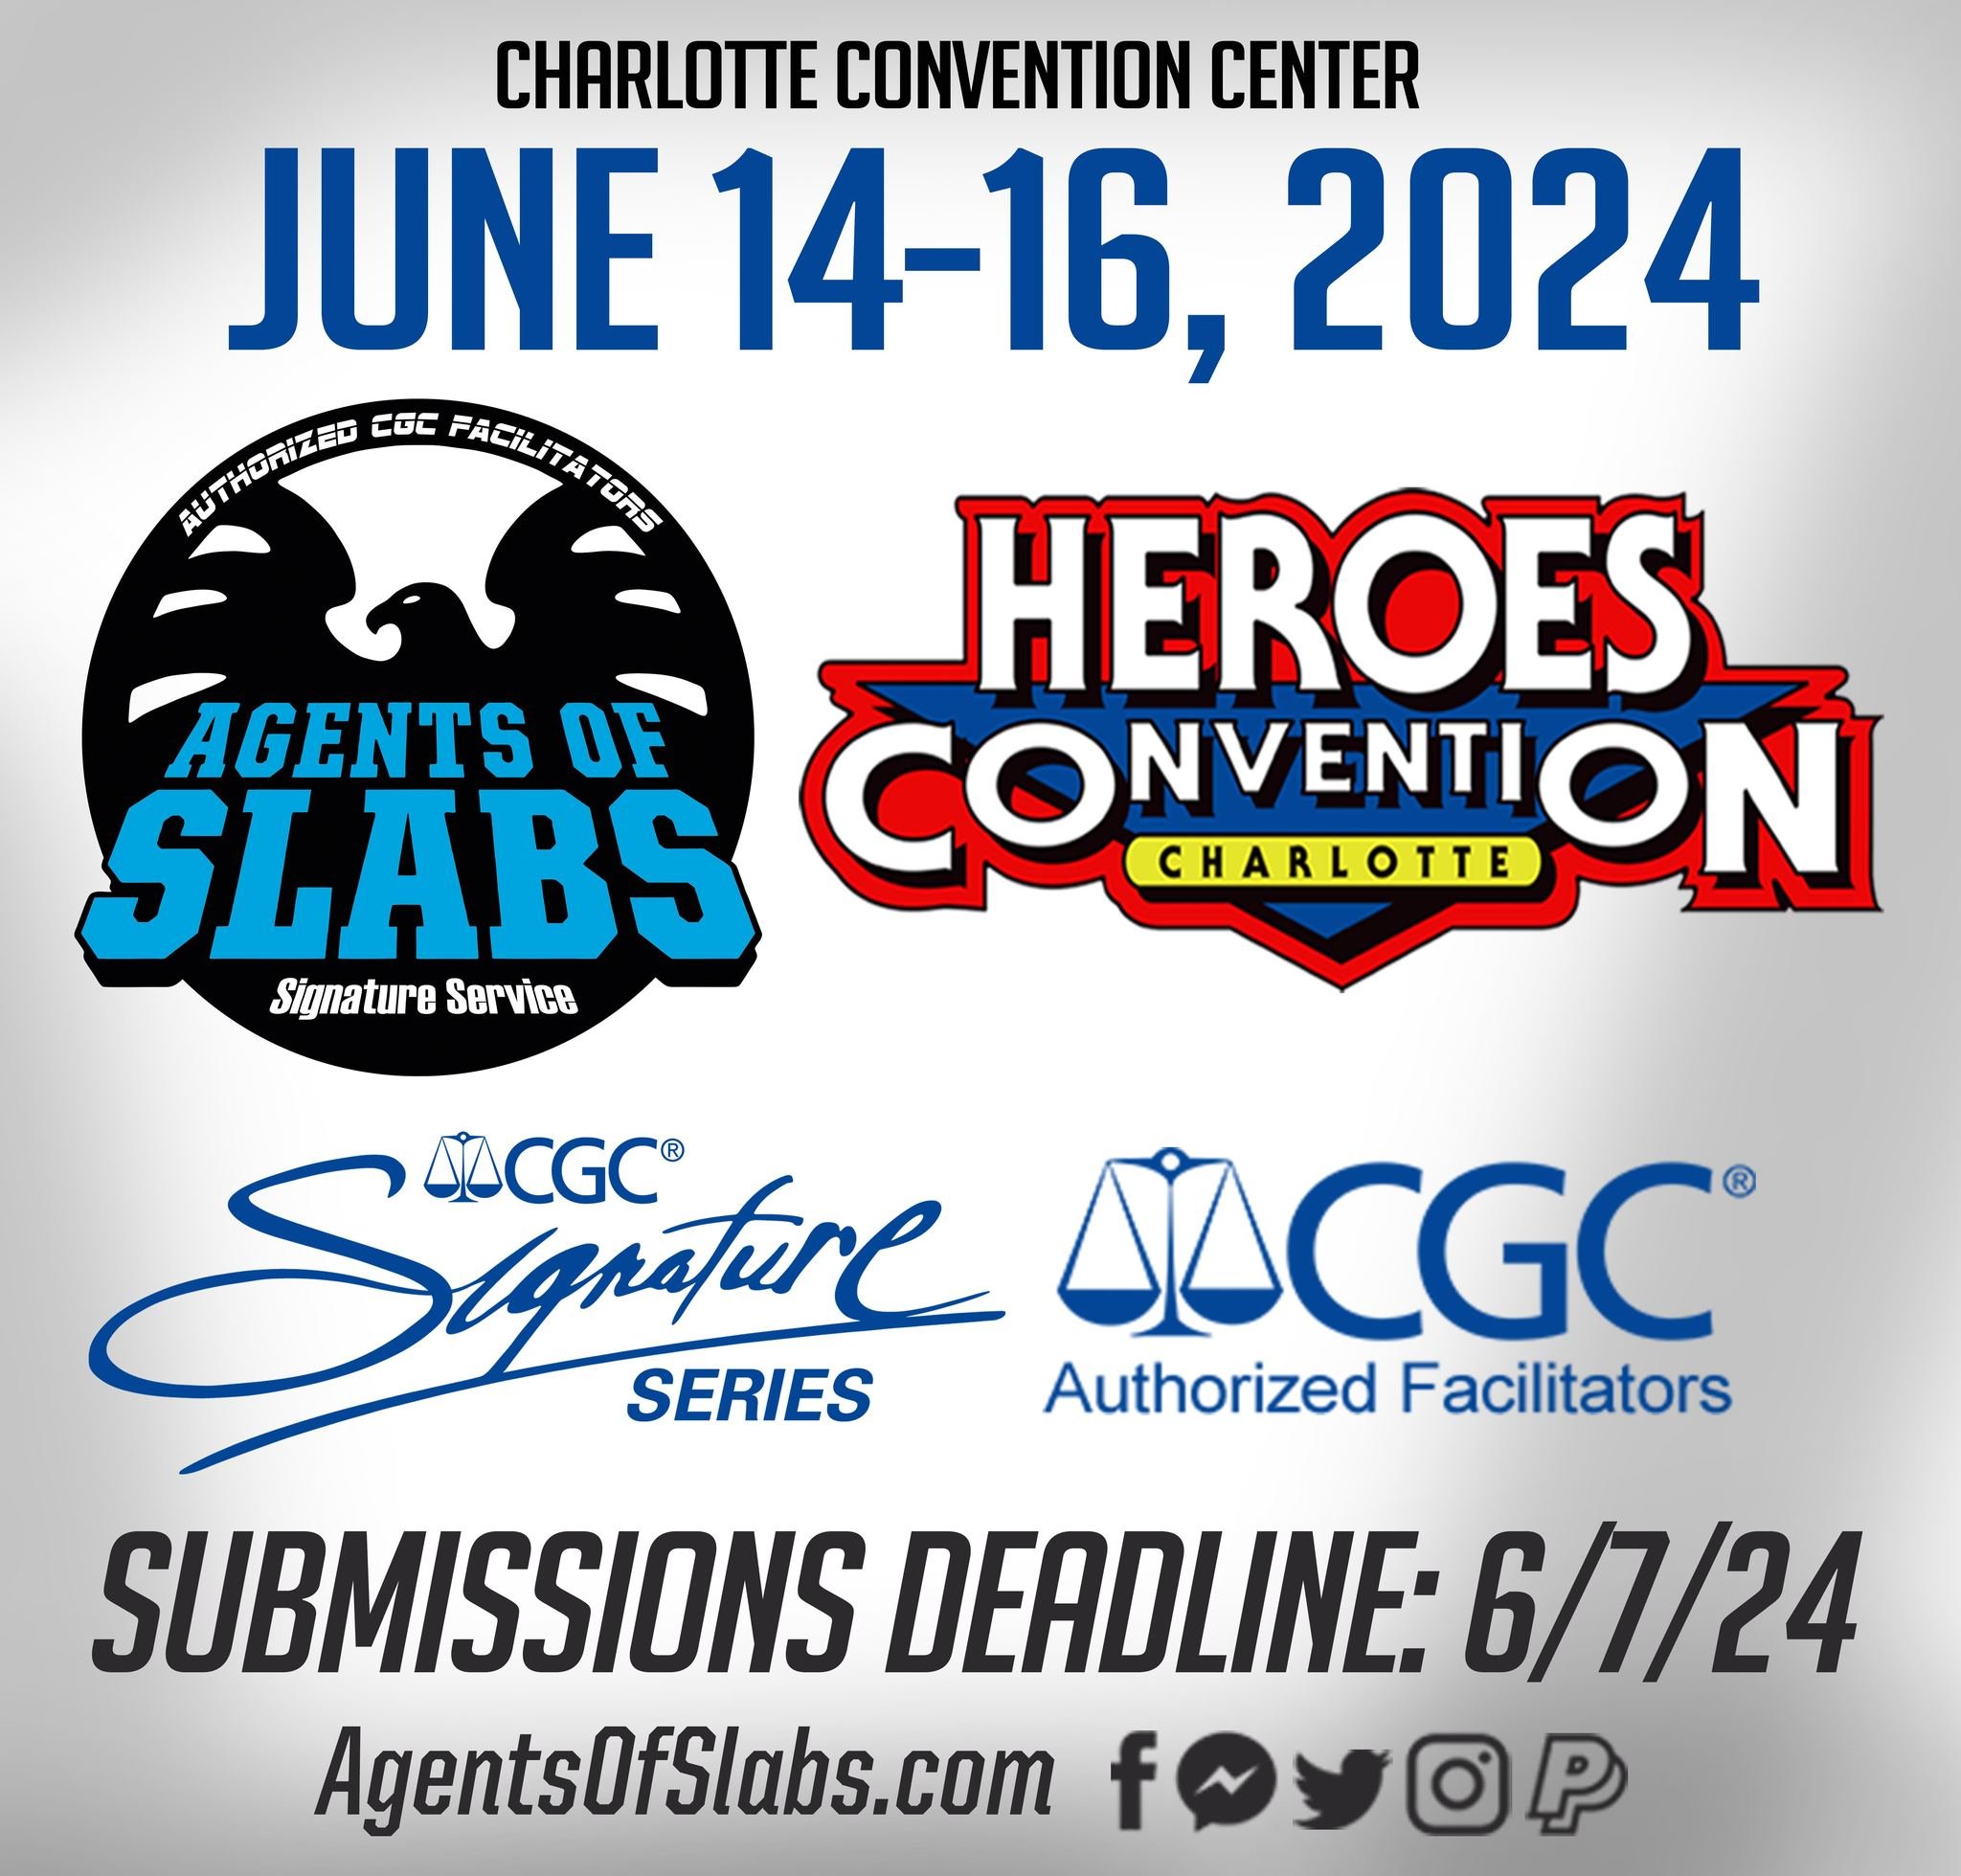 Big Announcement Number 2!
The Agents of Slabs team is heading to Charlotte, North Carolina for Heroes Con! We are actively taking mail-in submissions for this show! Deadline for submissions is 6/7/24! This show always has an awesome line-up filled w